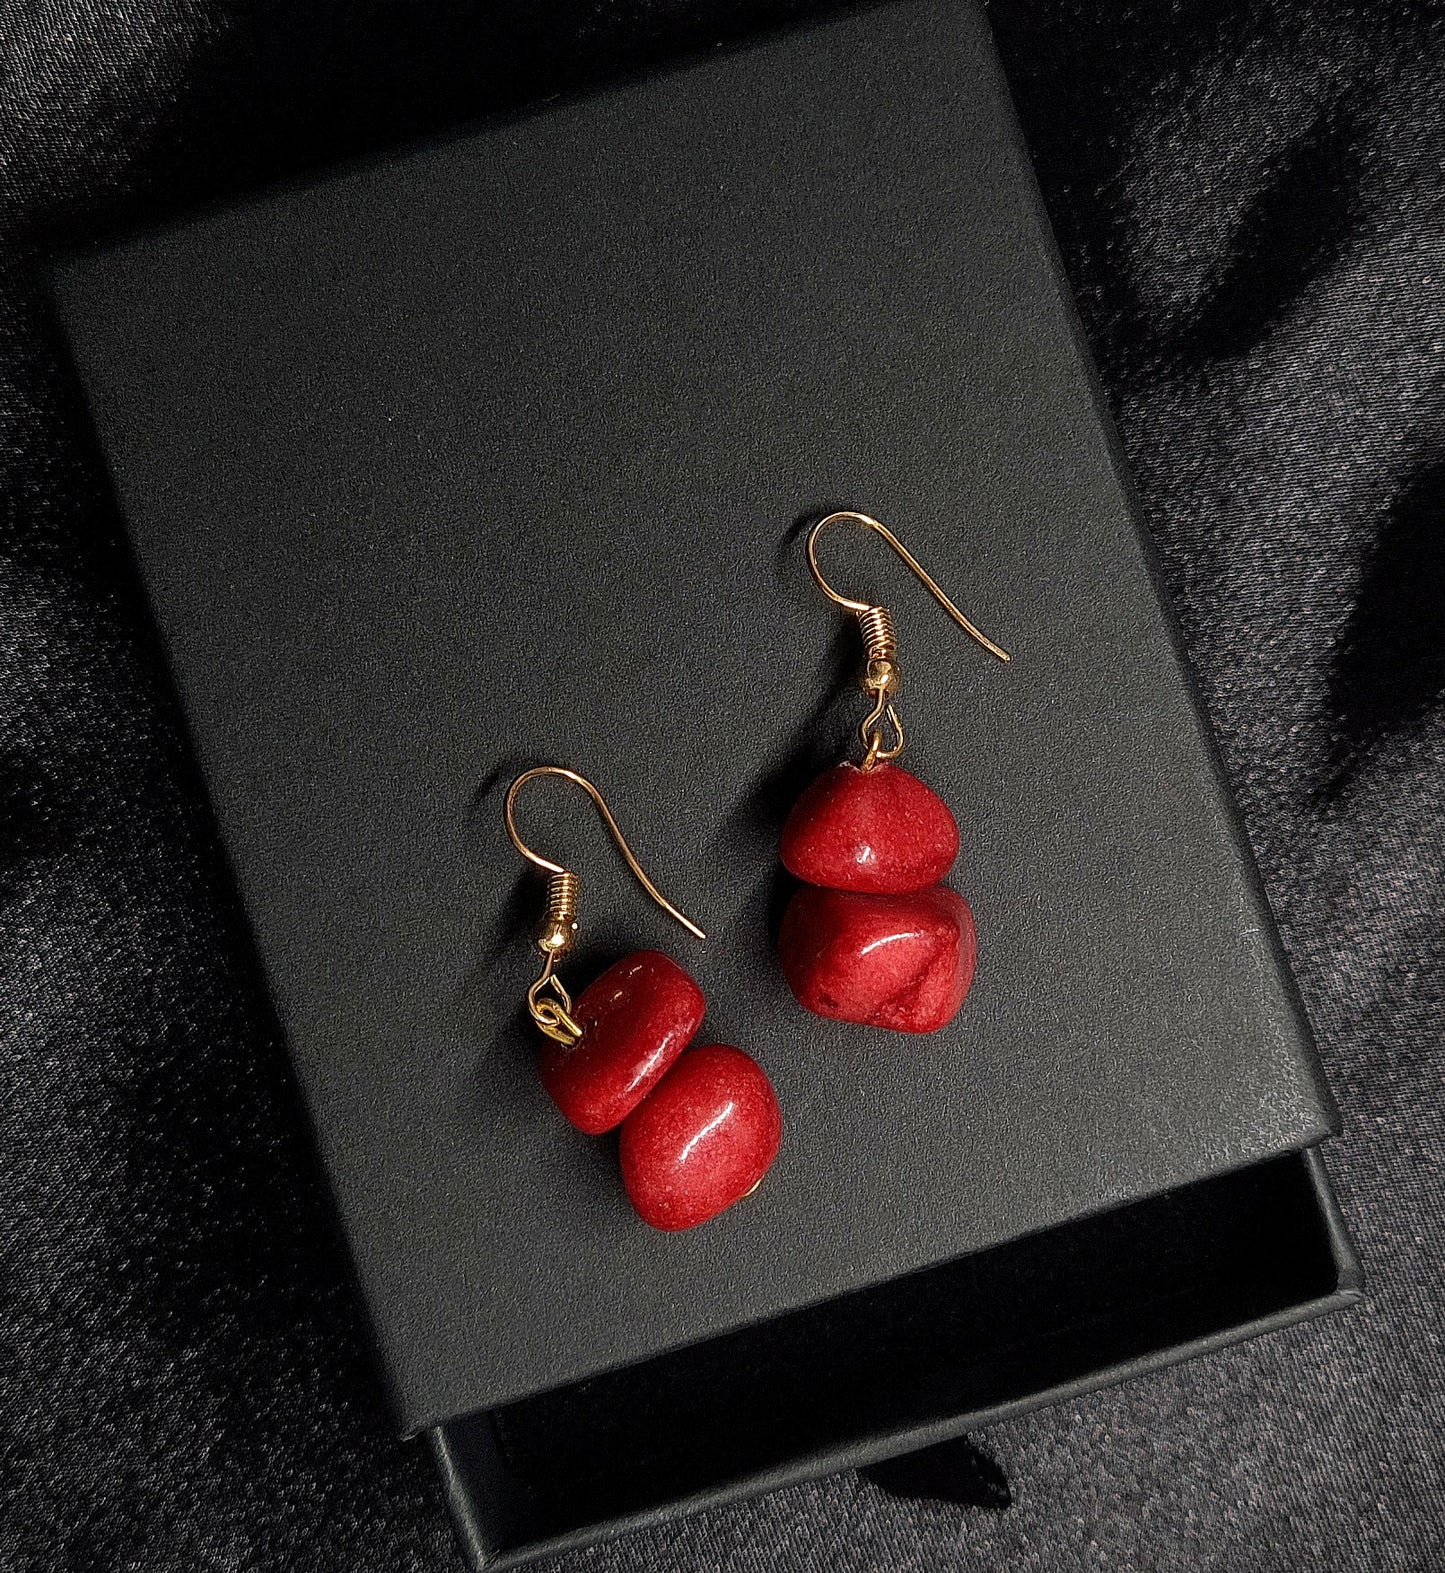 Pair of red earrings sitting on a black box. The earrings are made of red metal and have gold hooks. They are a simple and elegant design that would be perfect for any occasion. The earrings are sitting on a black box, which provides a nice contrast to the red color of the earrings.